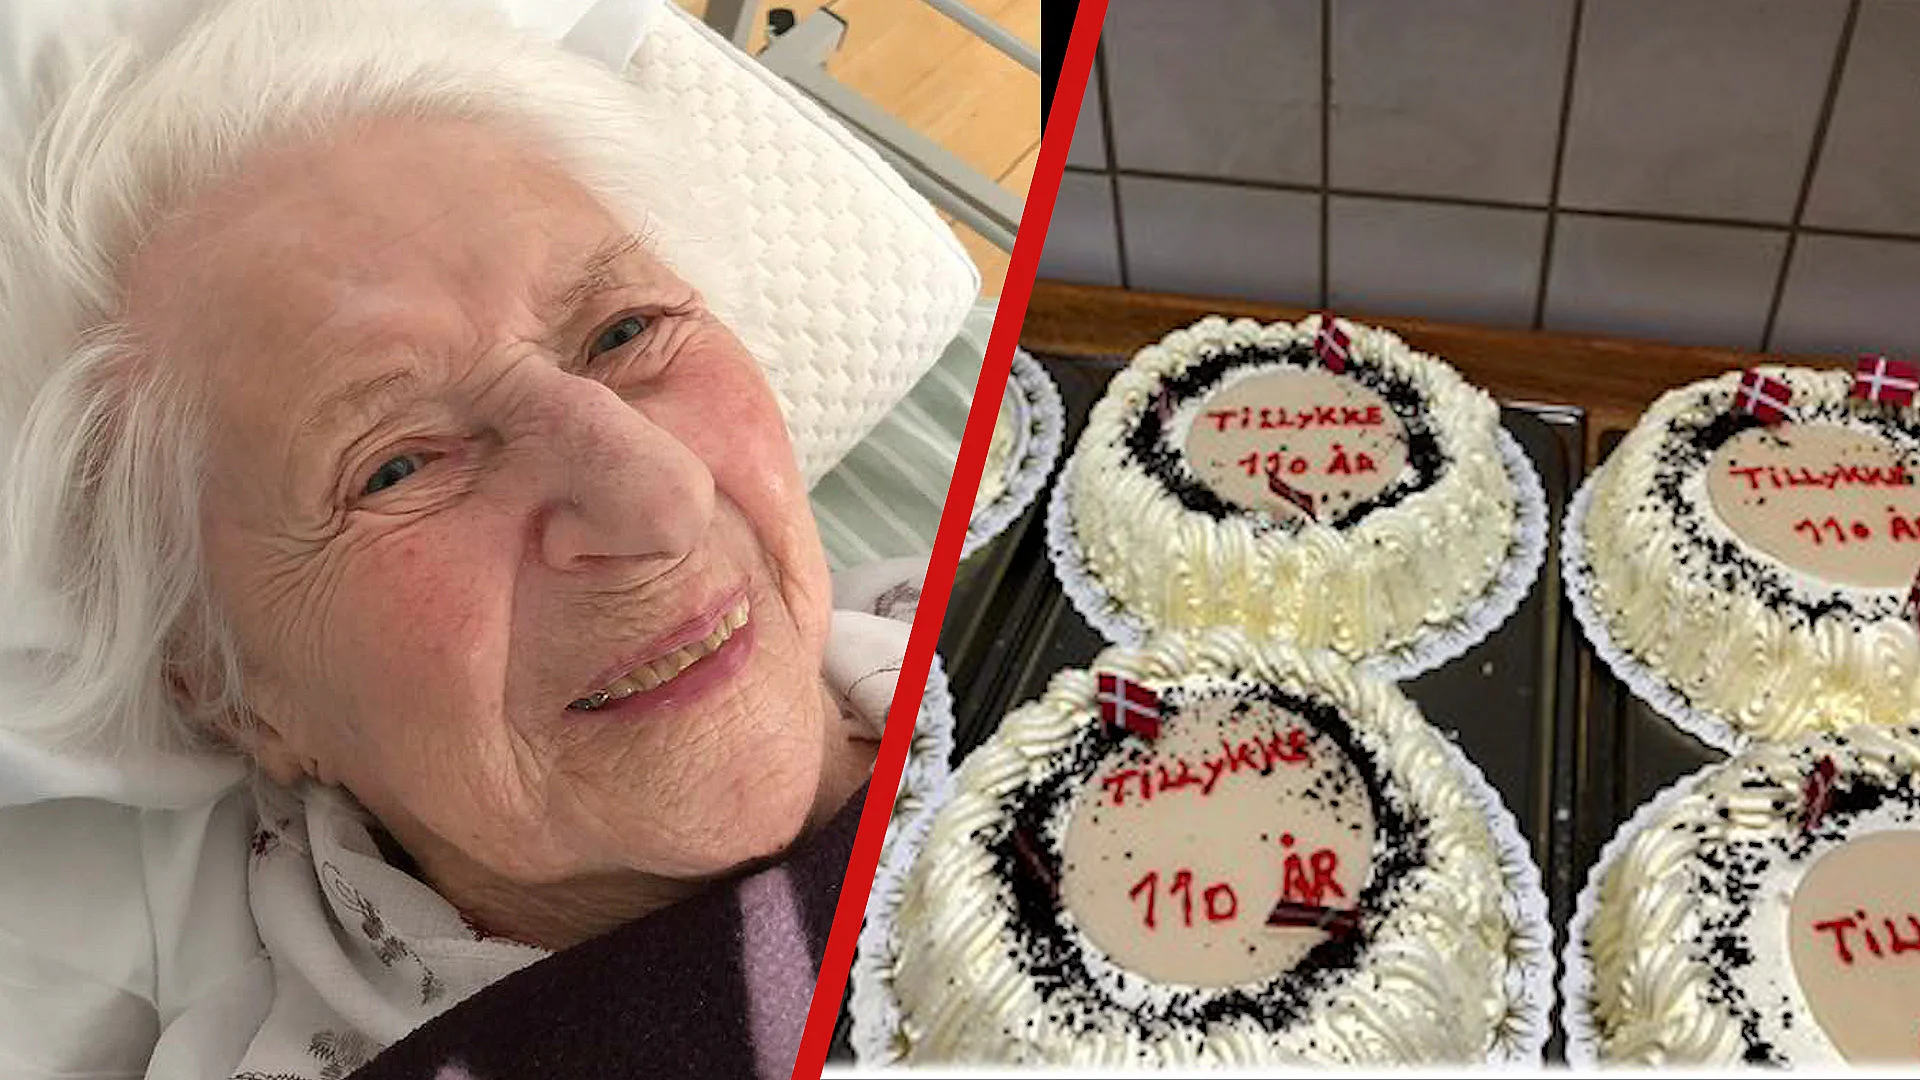 Karen Moritz at 110 and her birthday cakes for everyone